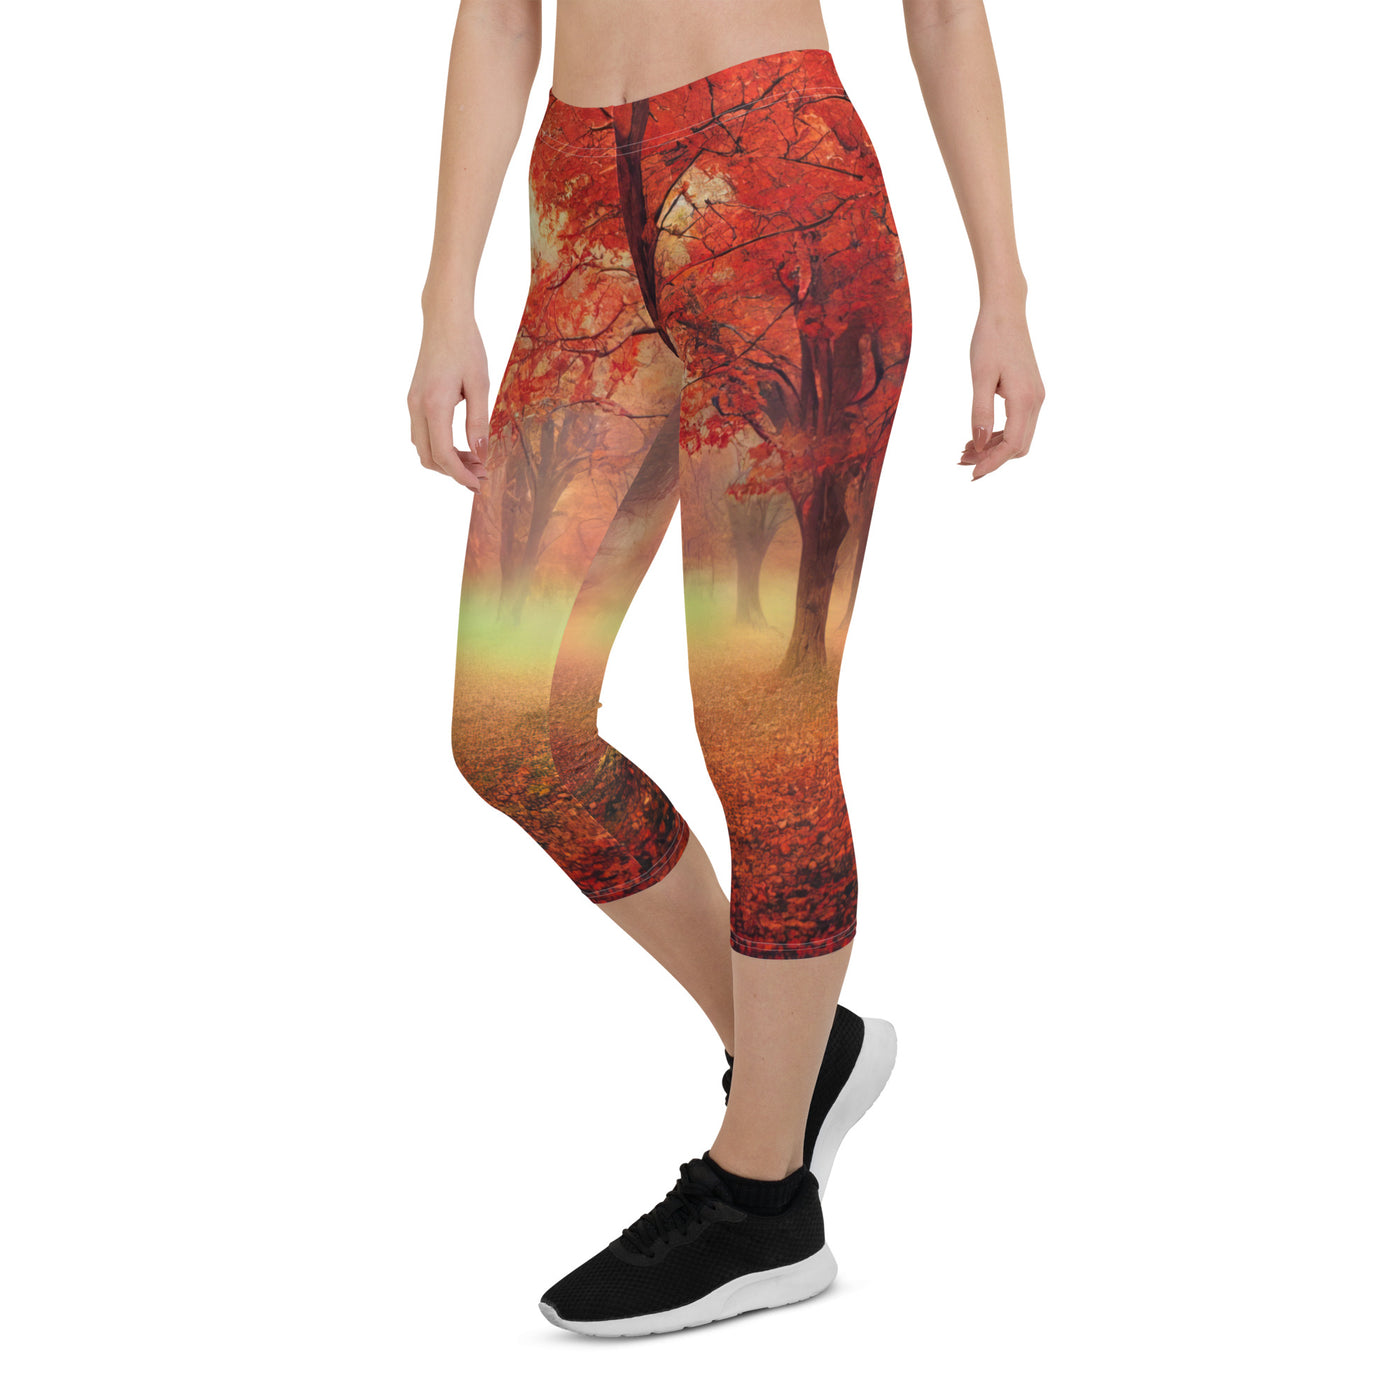 Wald im Herbst - Rote Herbstblätter - Capri Leggings (All-Over Print) camping xxx